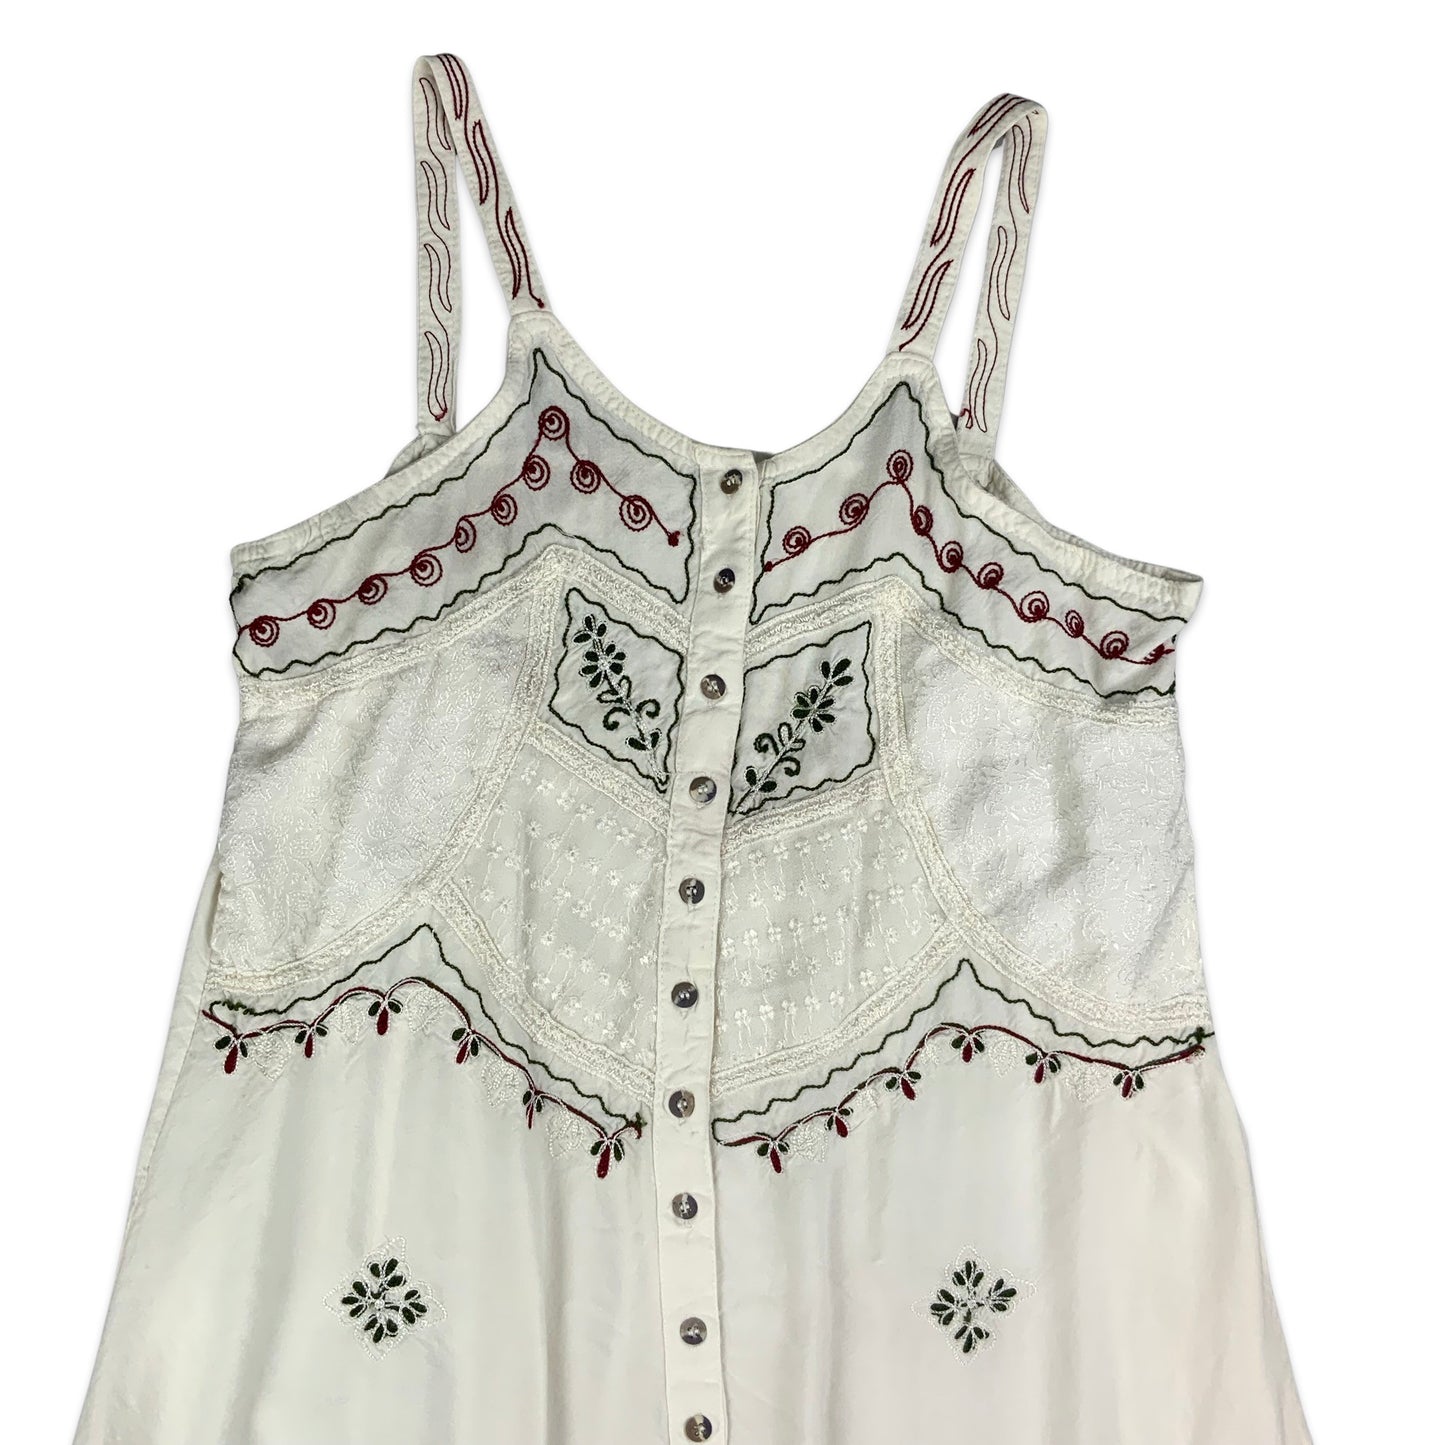 90s White Button Up Mini Dress with Floral Embroidery